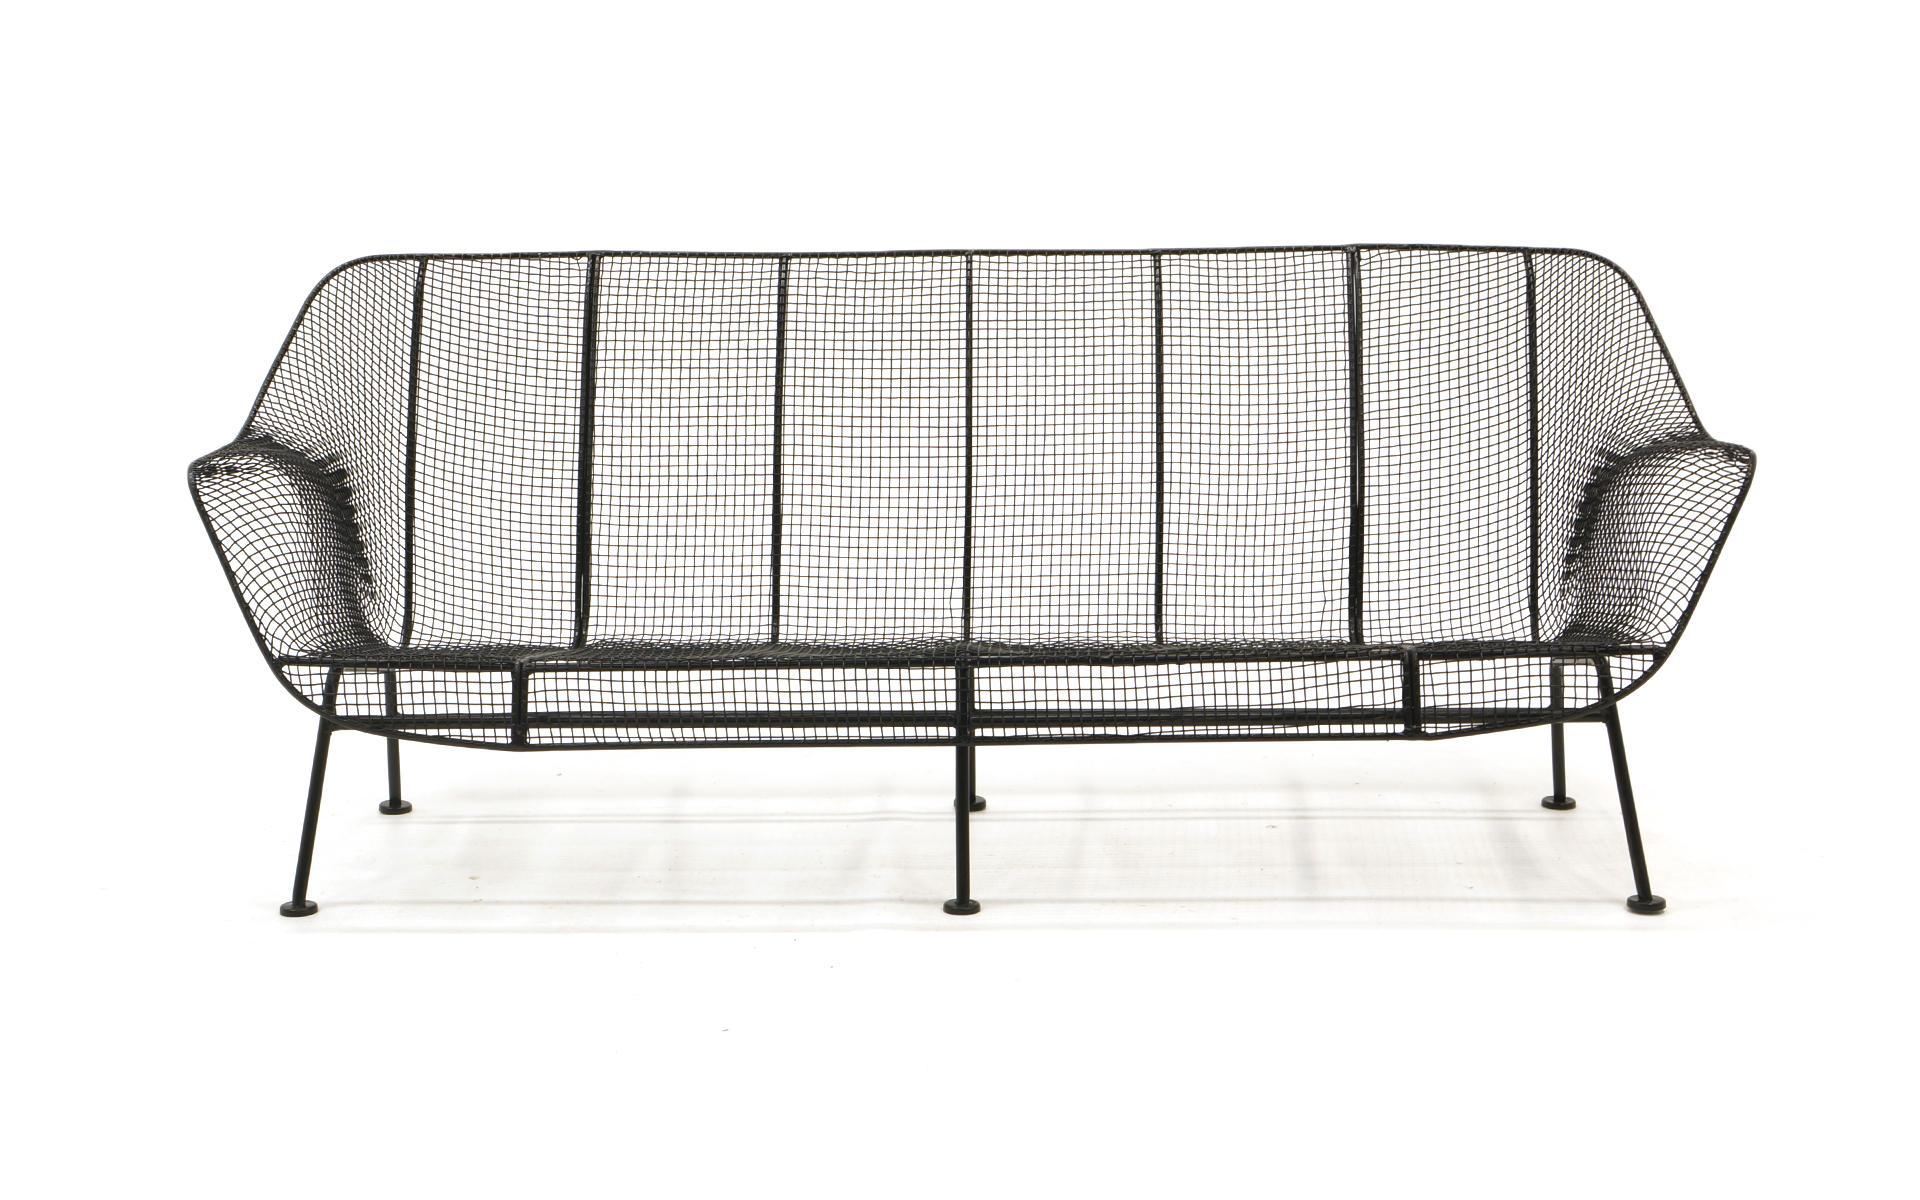 Sculptura patio sofa designed by Russell Woodard for Woodard, 1950s. Woven wire with wrought iron frames, these have been professionally media blasted and powder coated in a satin black finish. Beautiful and ready to use.